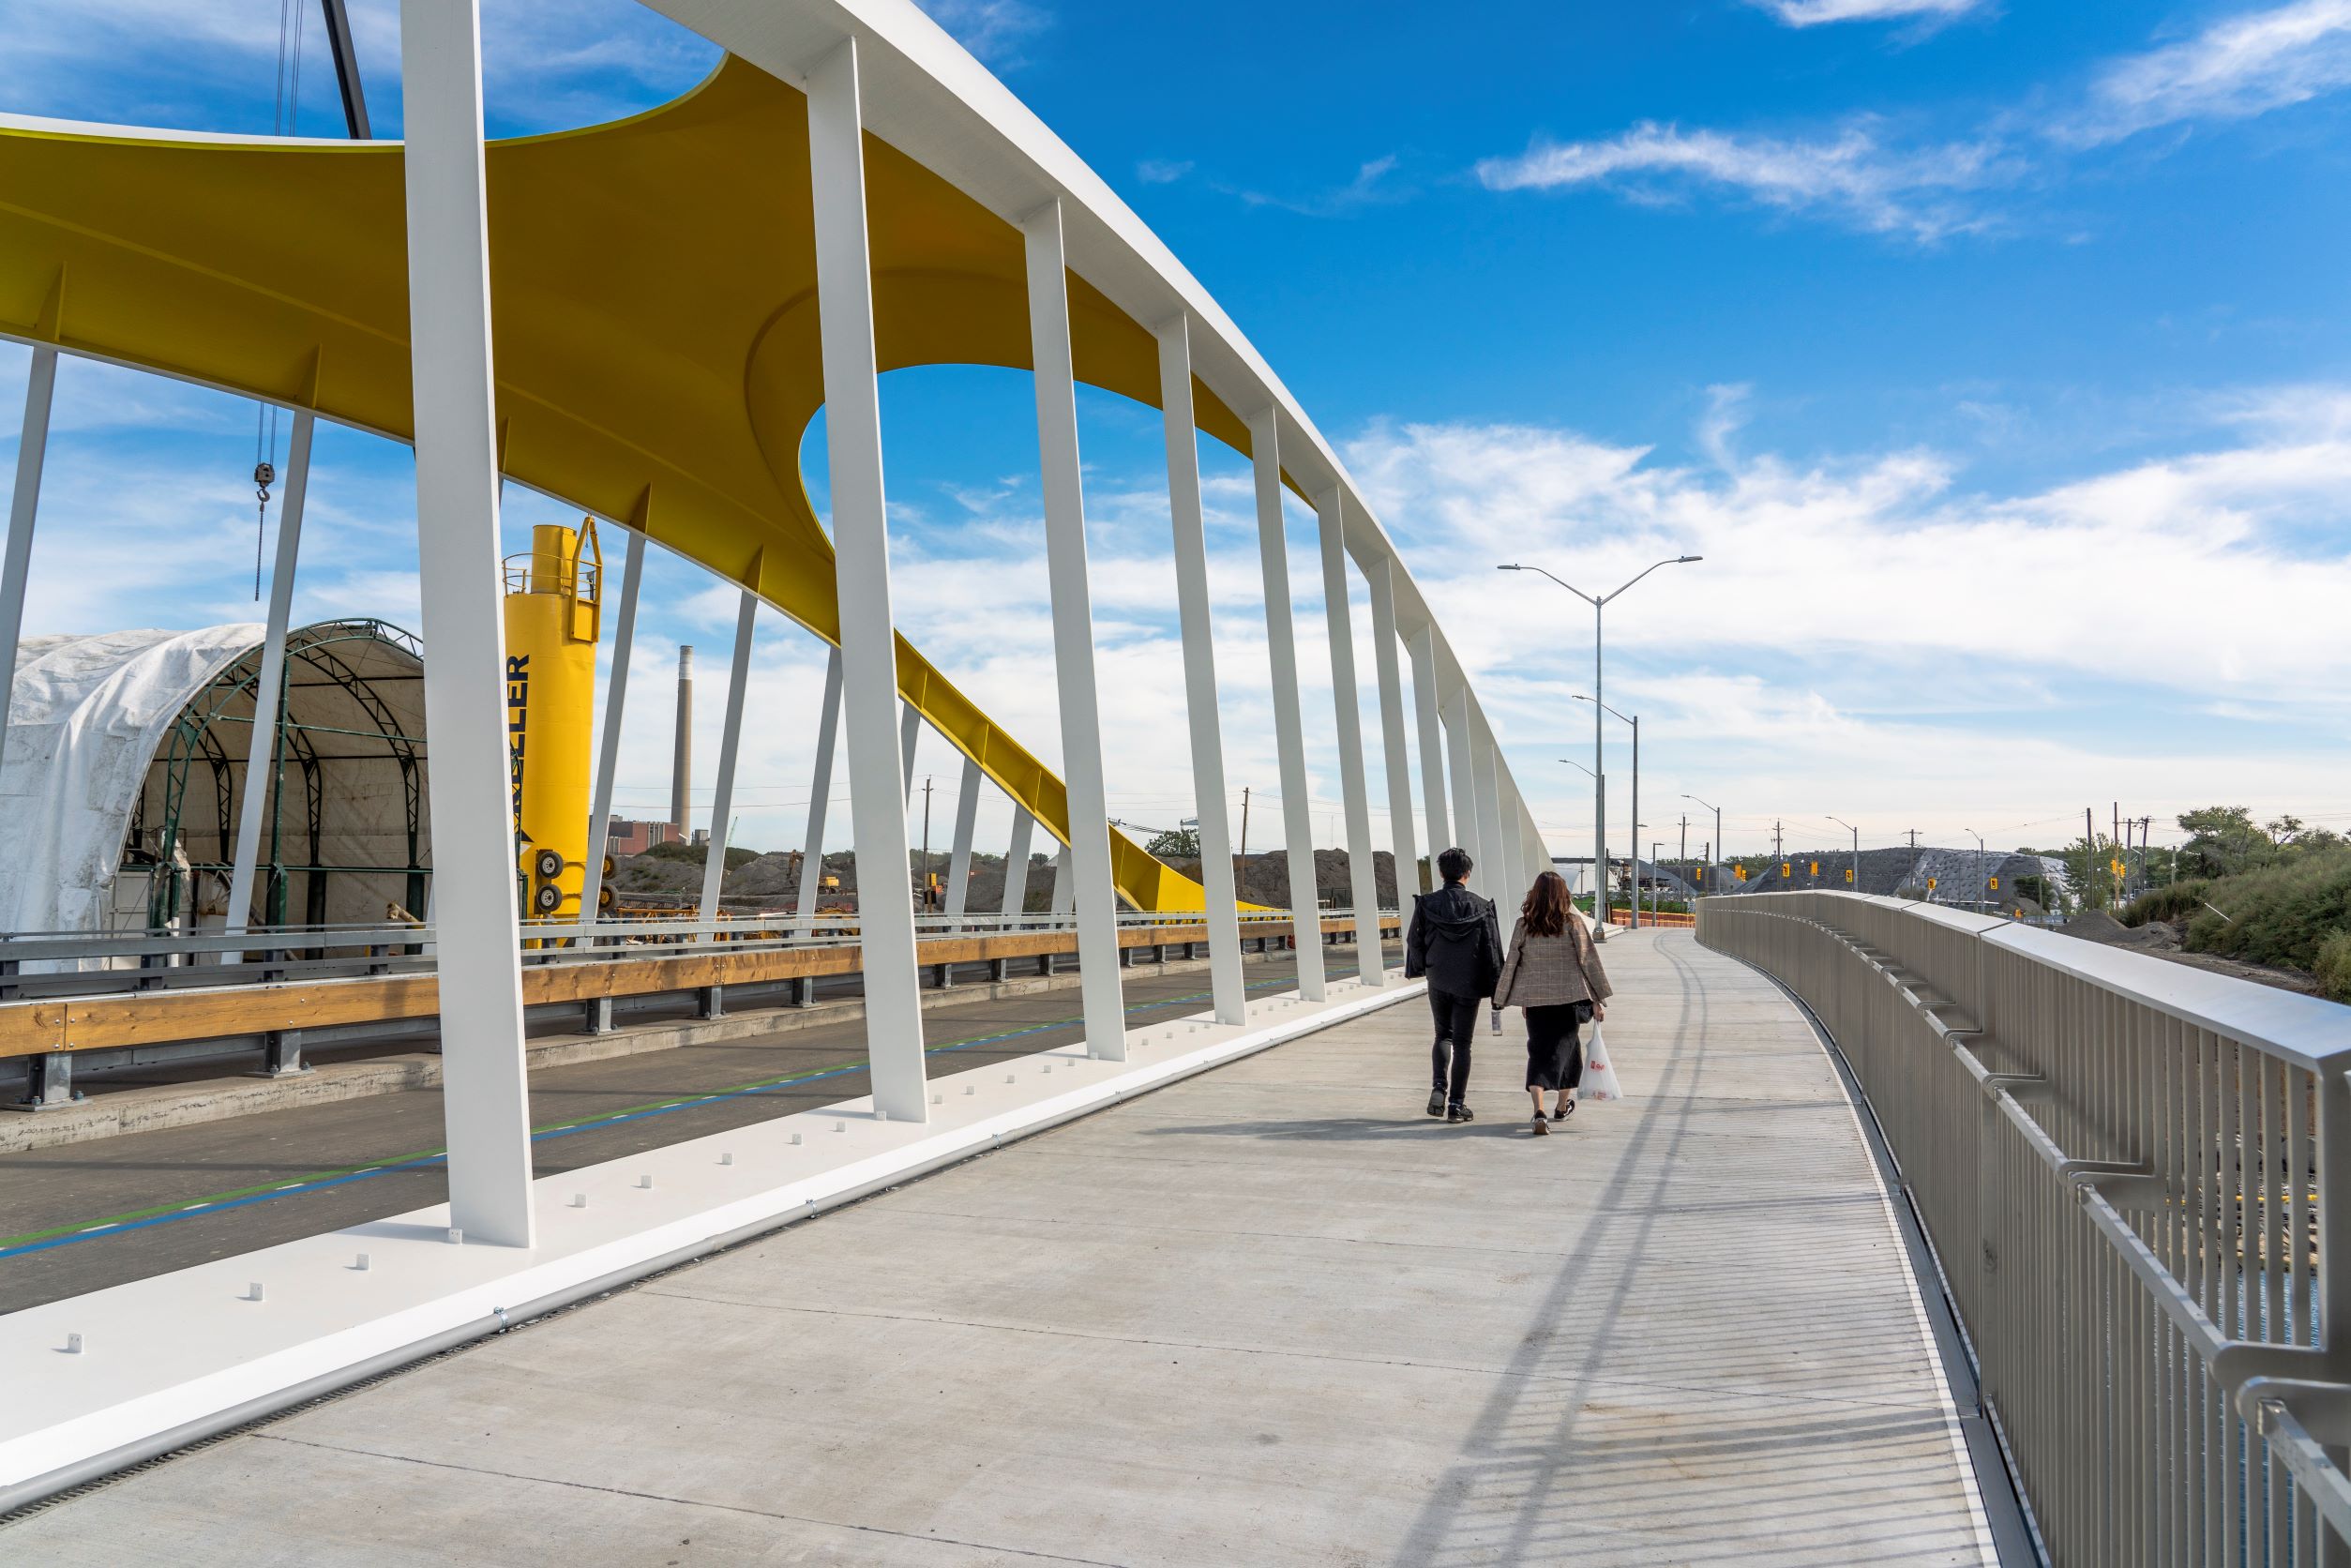 Two people walk along a wide sidewalk next to the yellow and white arch of the bridge.